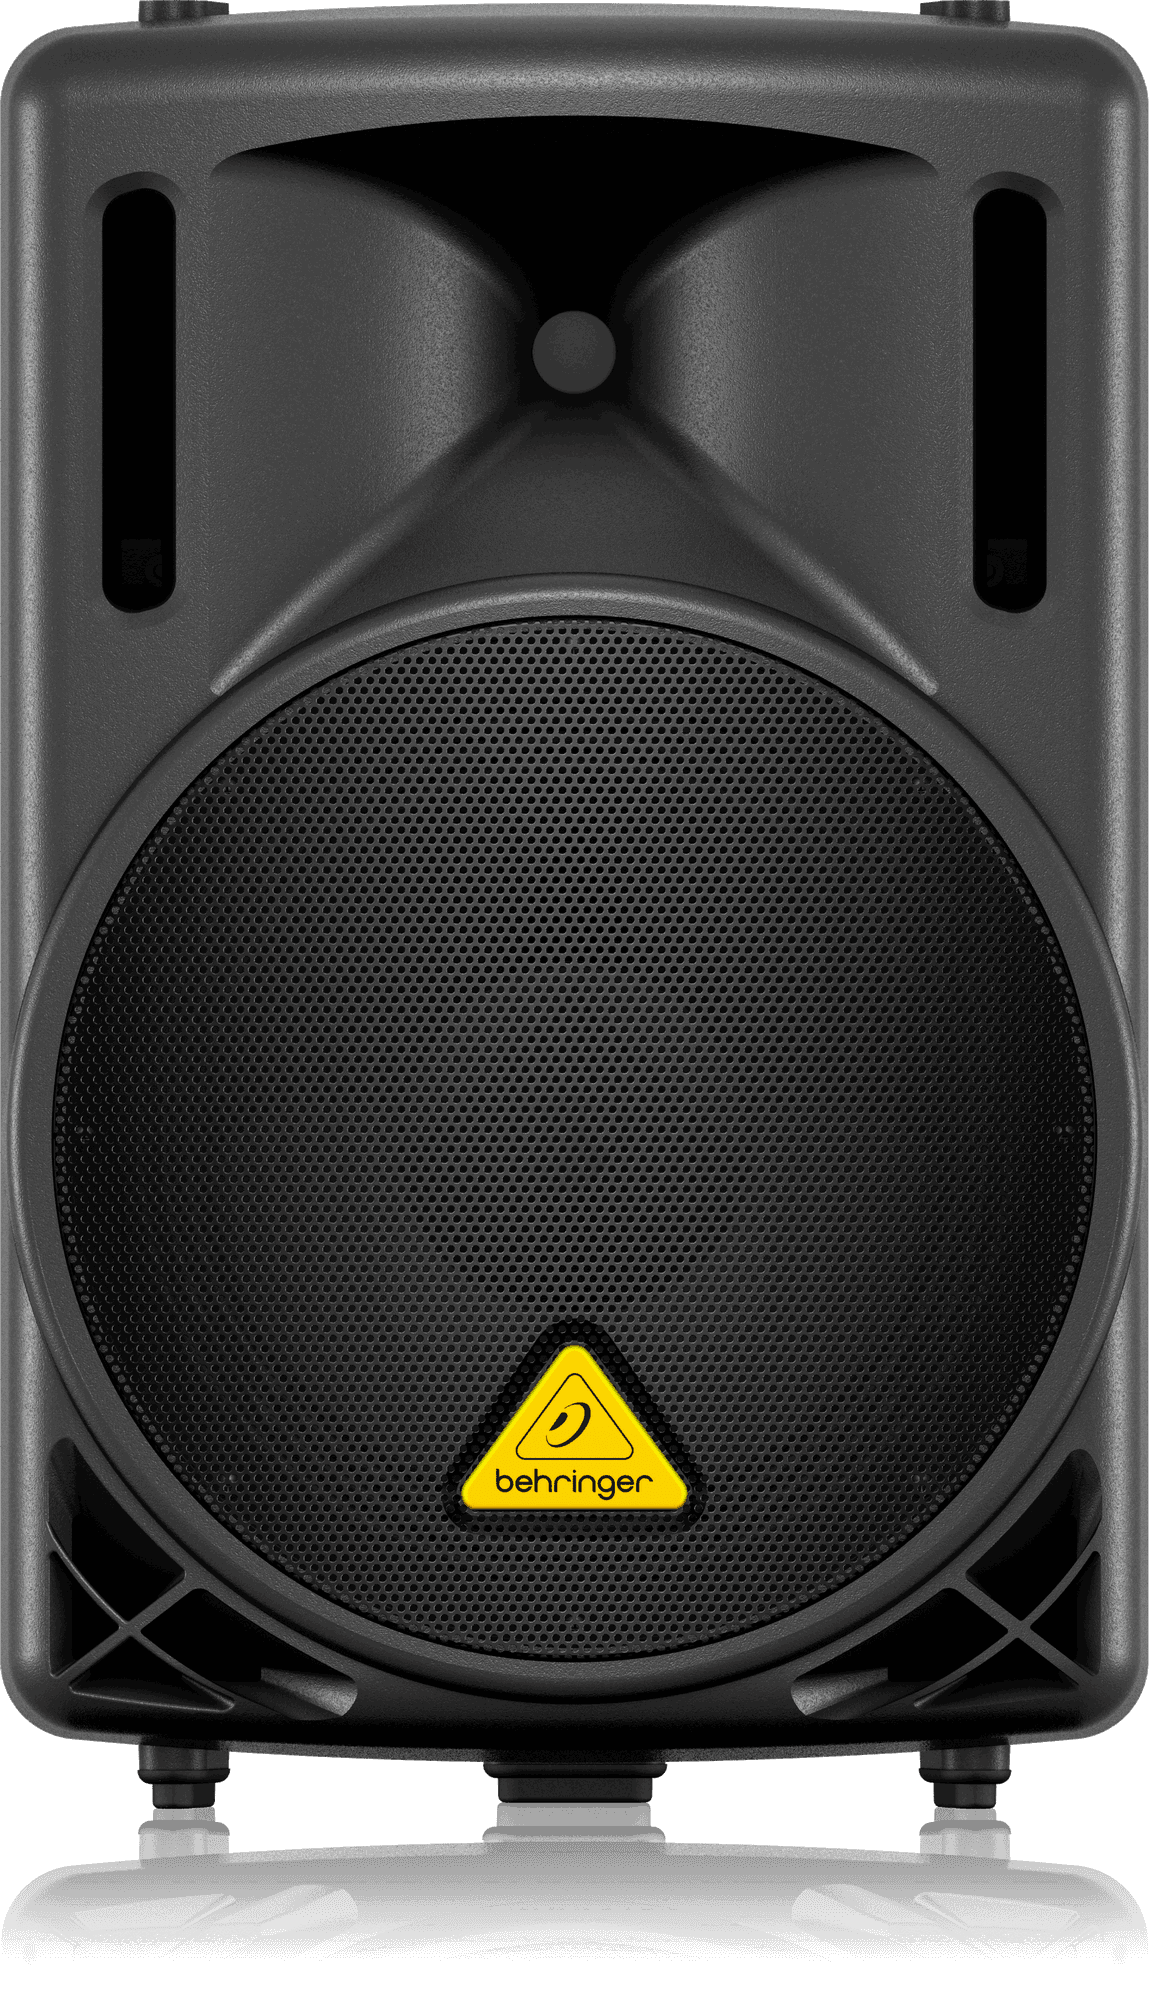 Behringer B212D Active 550 Watt 2-Way PA Speaker System with 12" Woofer and 1.35" Compression Driver | BEHRINGER , Zoso Music